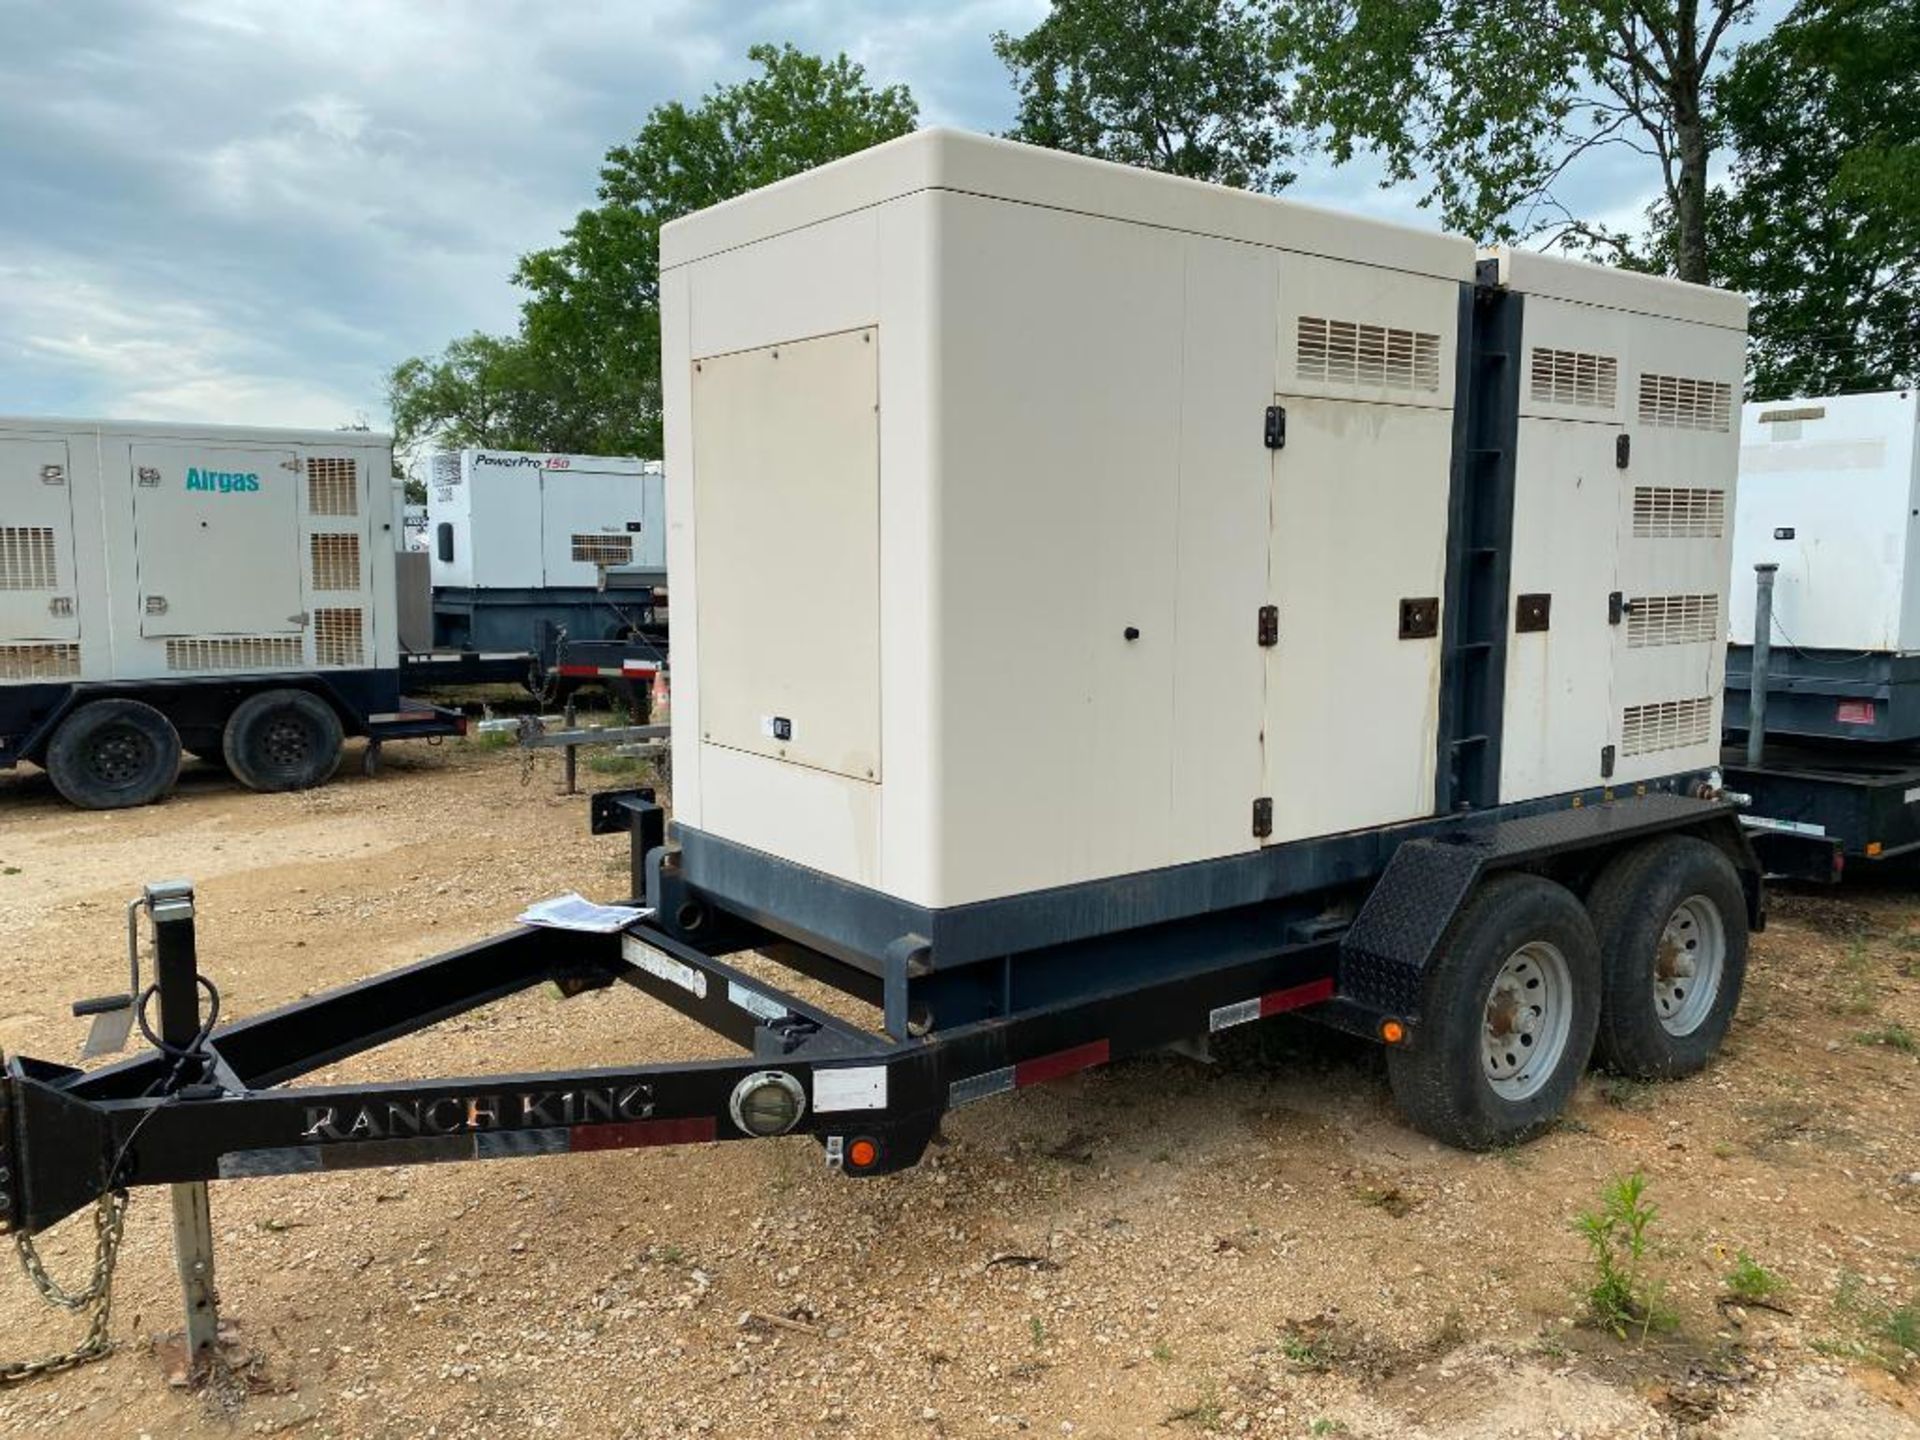 2014 AltaStream Power Systems 125 KVA Towable Generator, Dual Fuel Natural Gas or LP, Model APHG150- - Image 3 of 14